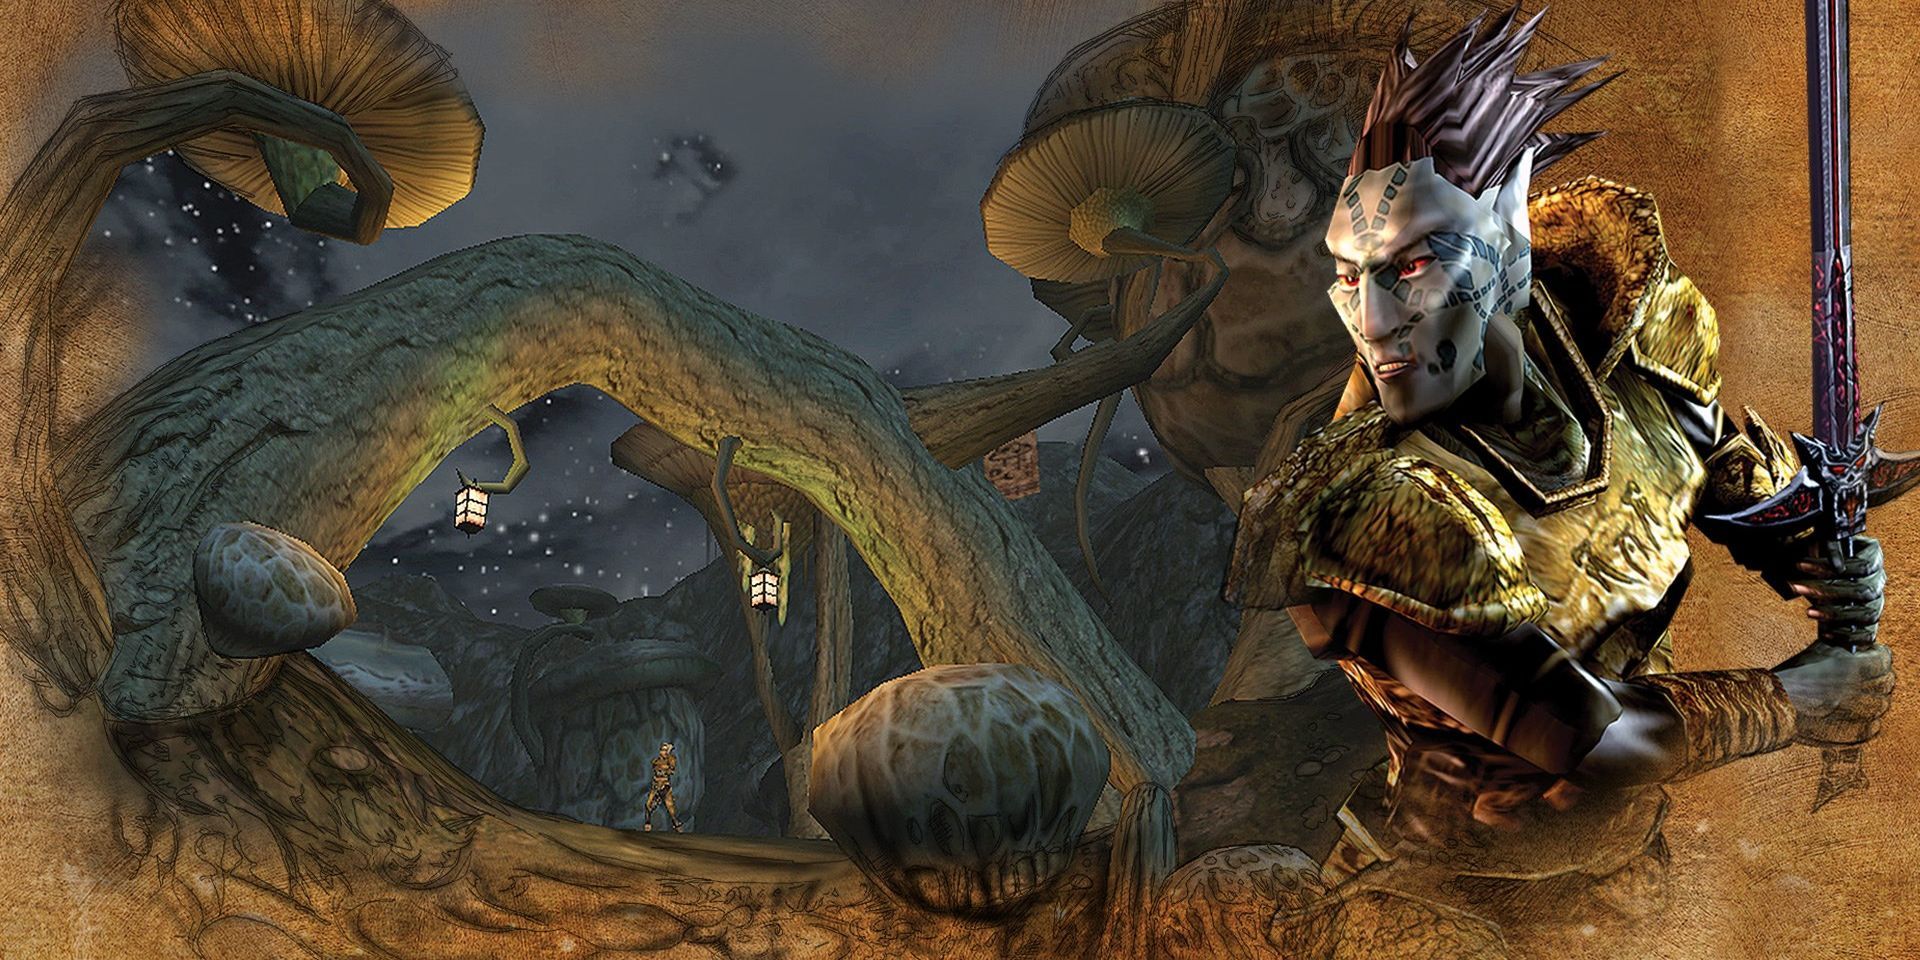 screensaver-style art showing an environment and a character from Morrowind